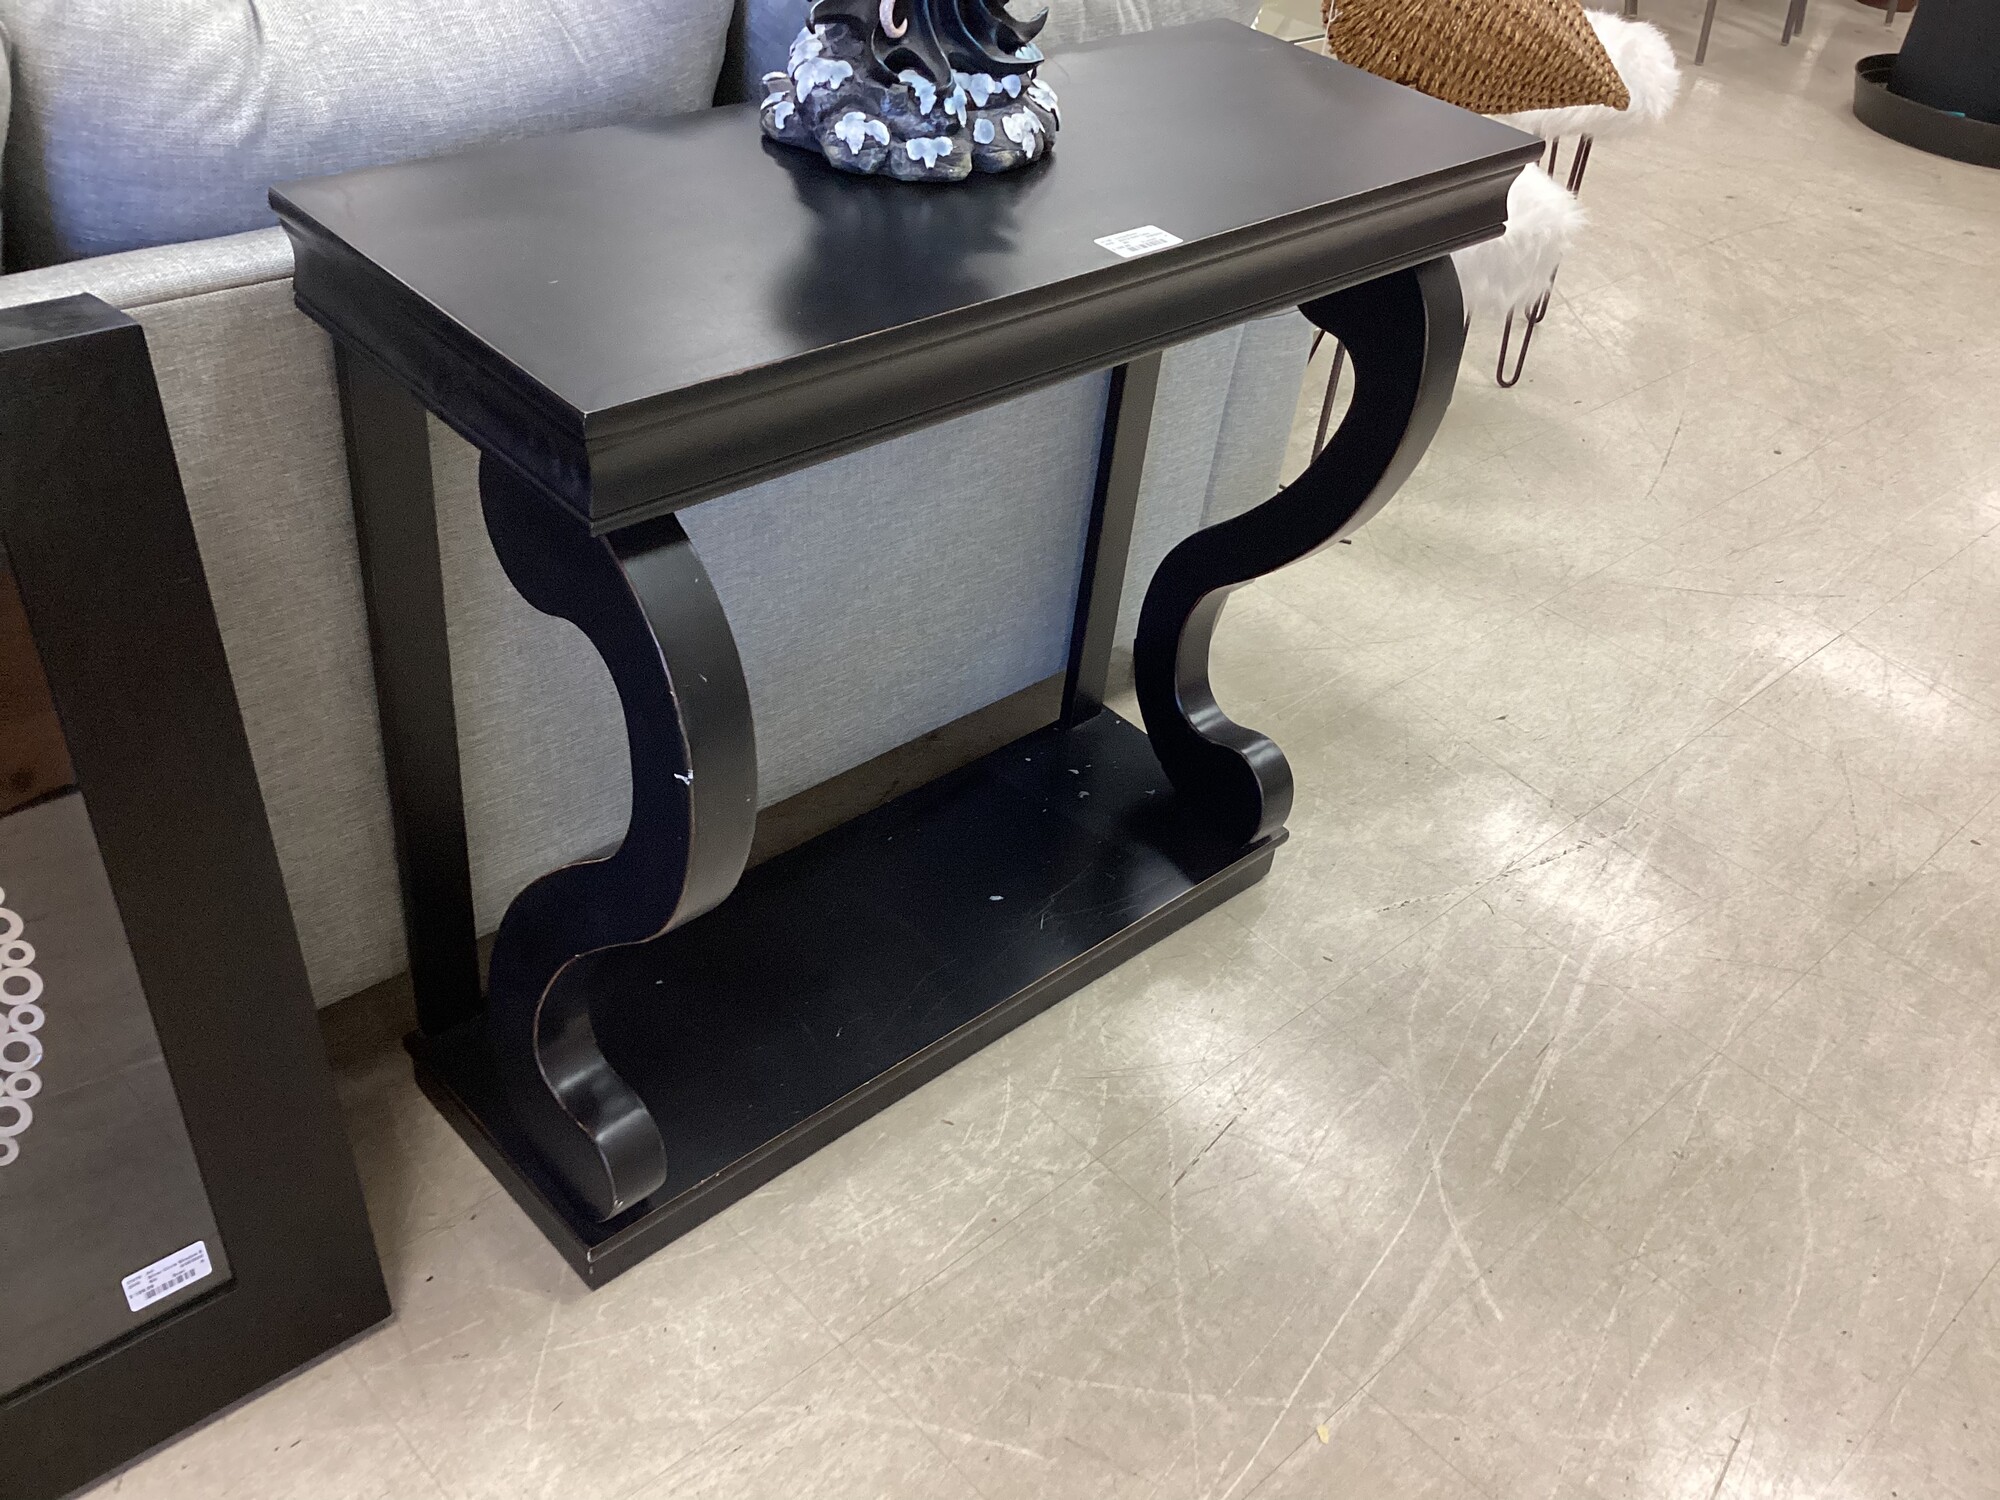 Entry/ Sofa Table, Blk, 2 Levels
36 in Wide x 14 in Deep x 33 in Tall